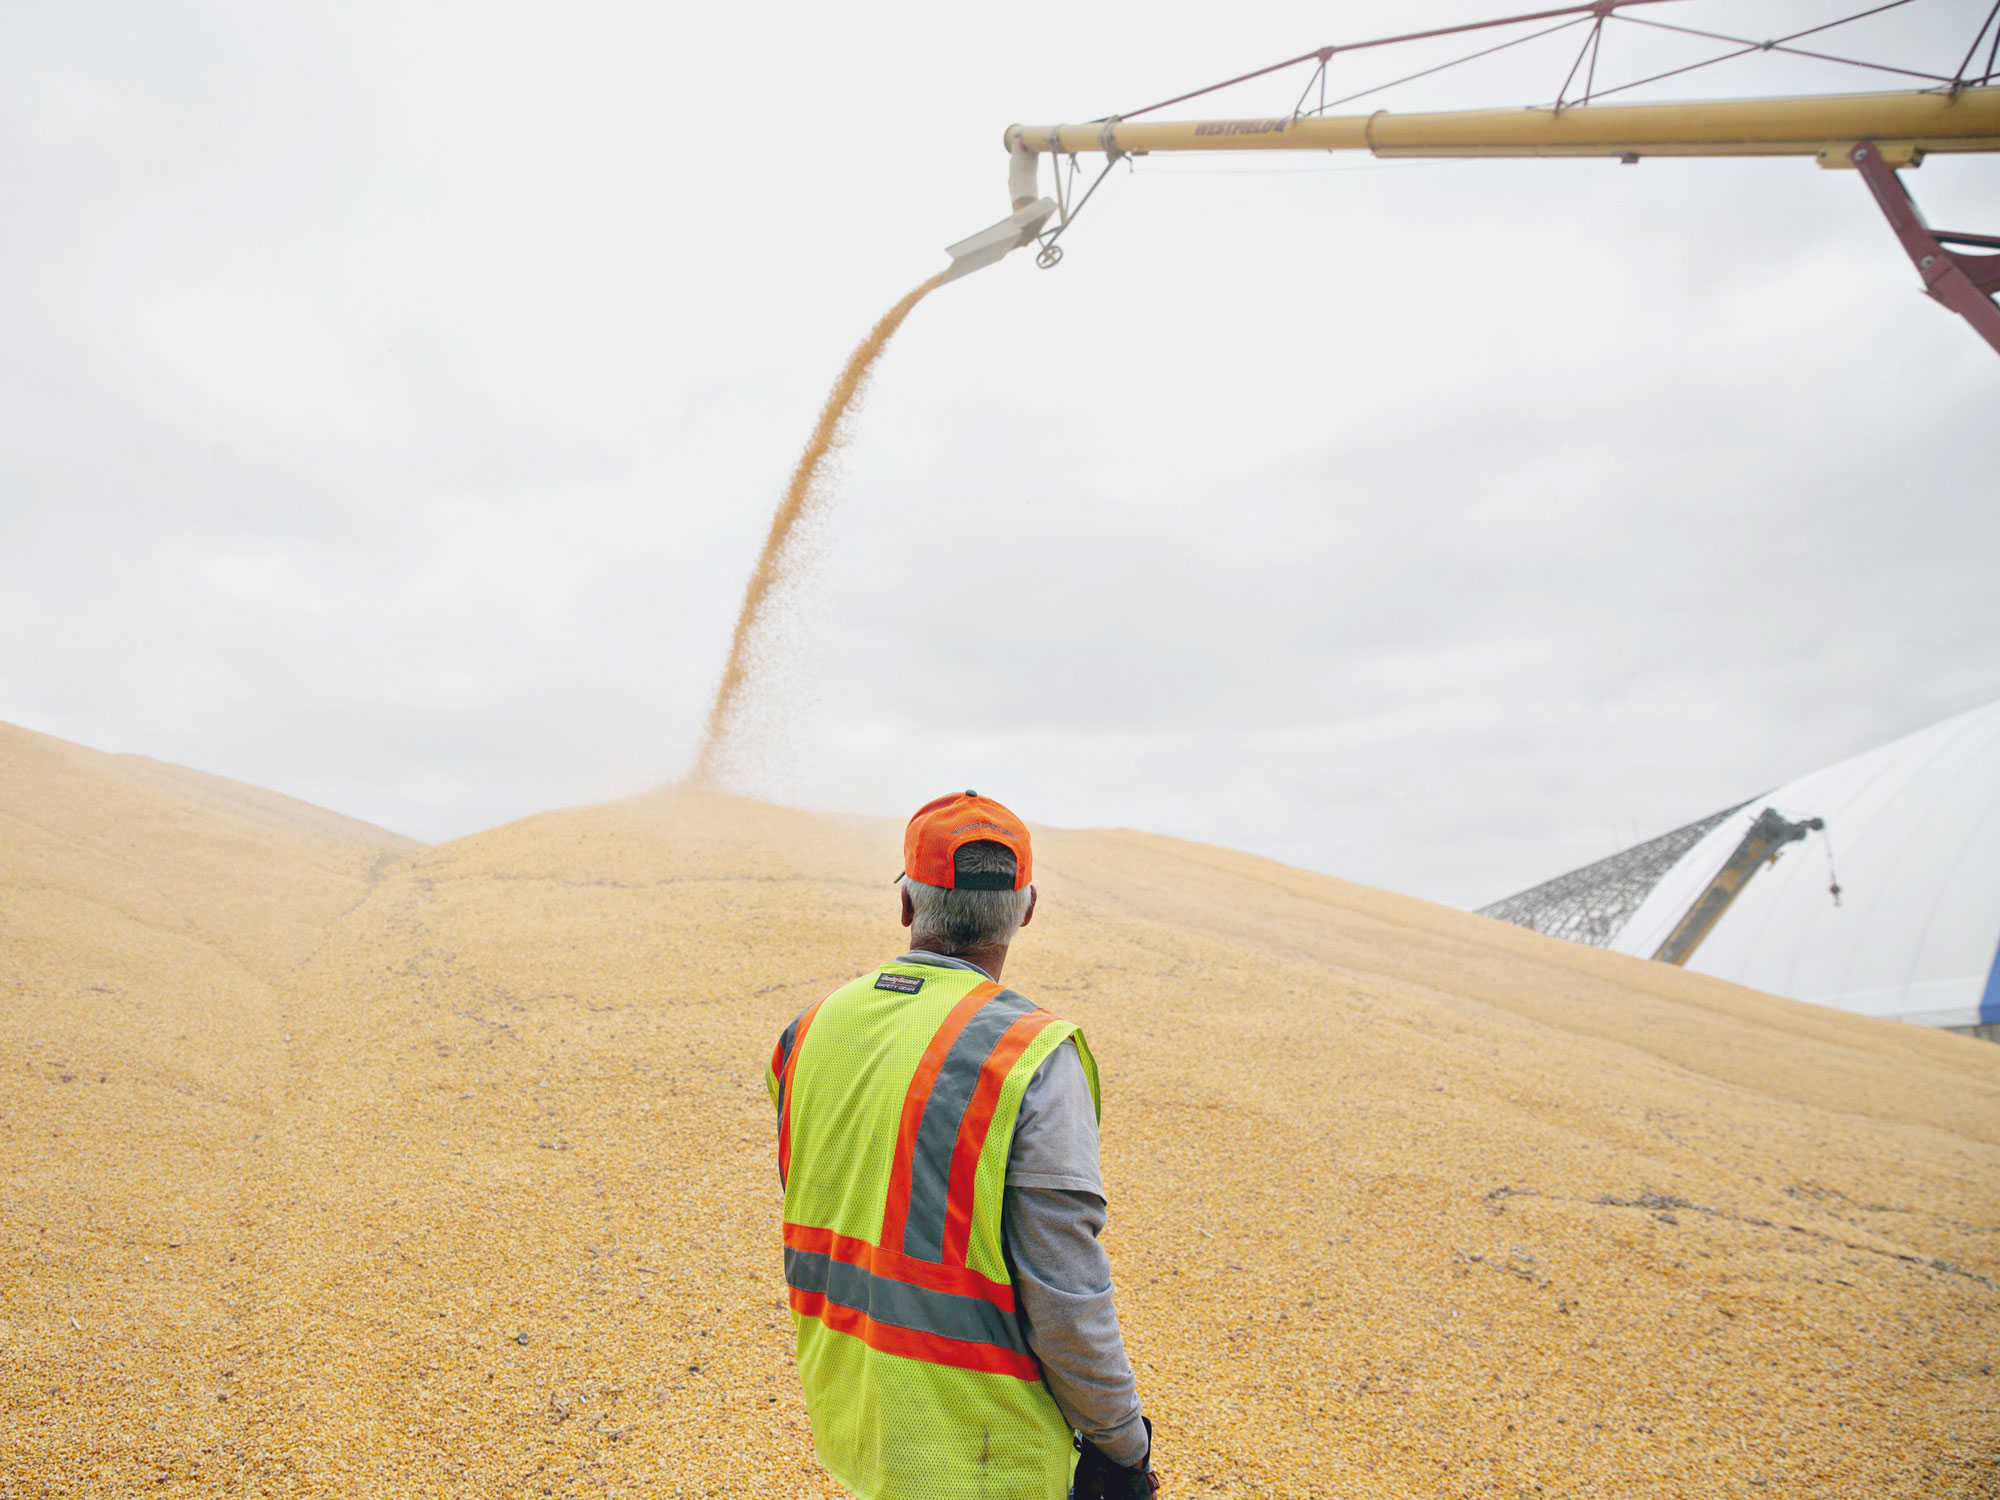 Corn being loaded at the Michlig Grain LLC elevator in Sheffield, Illinois.